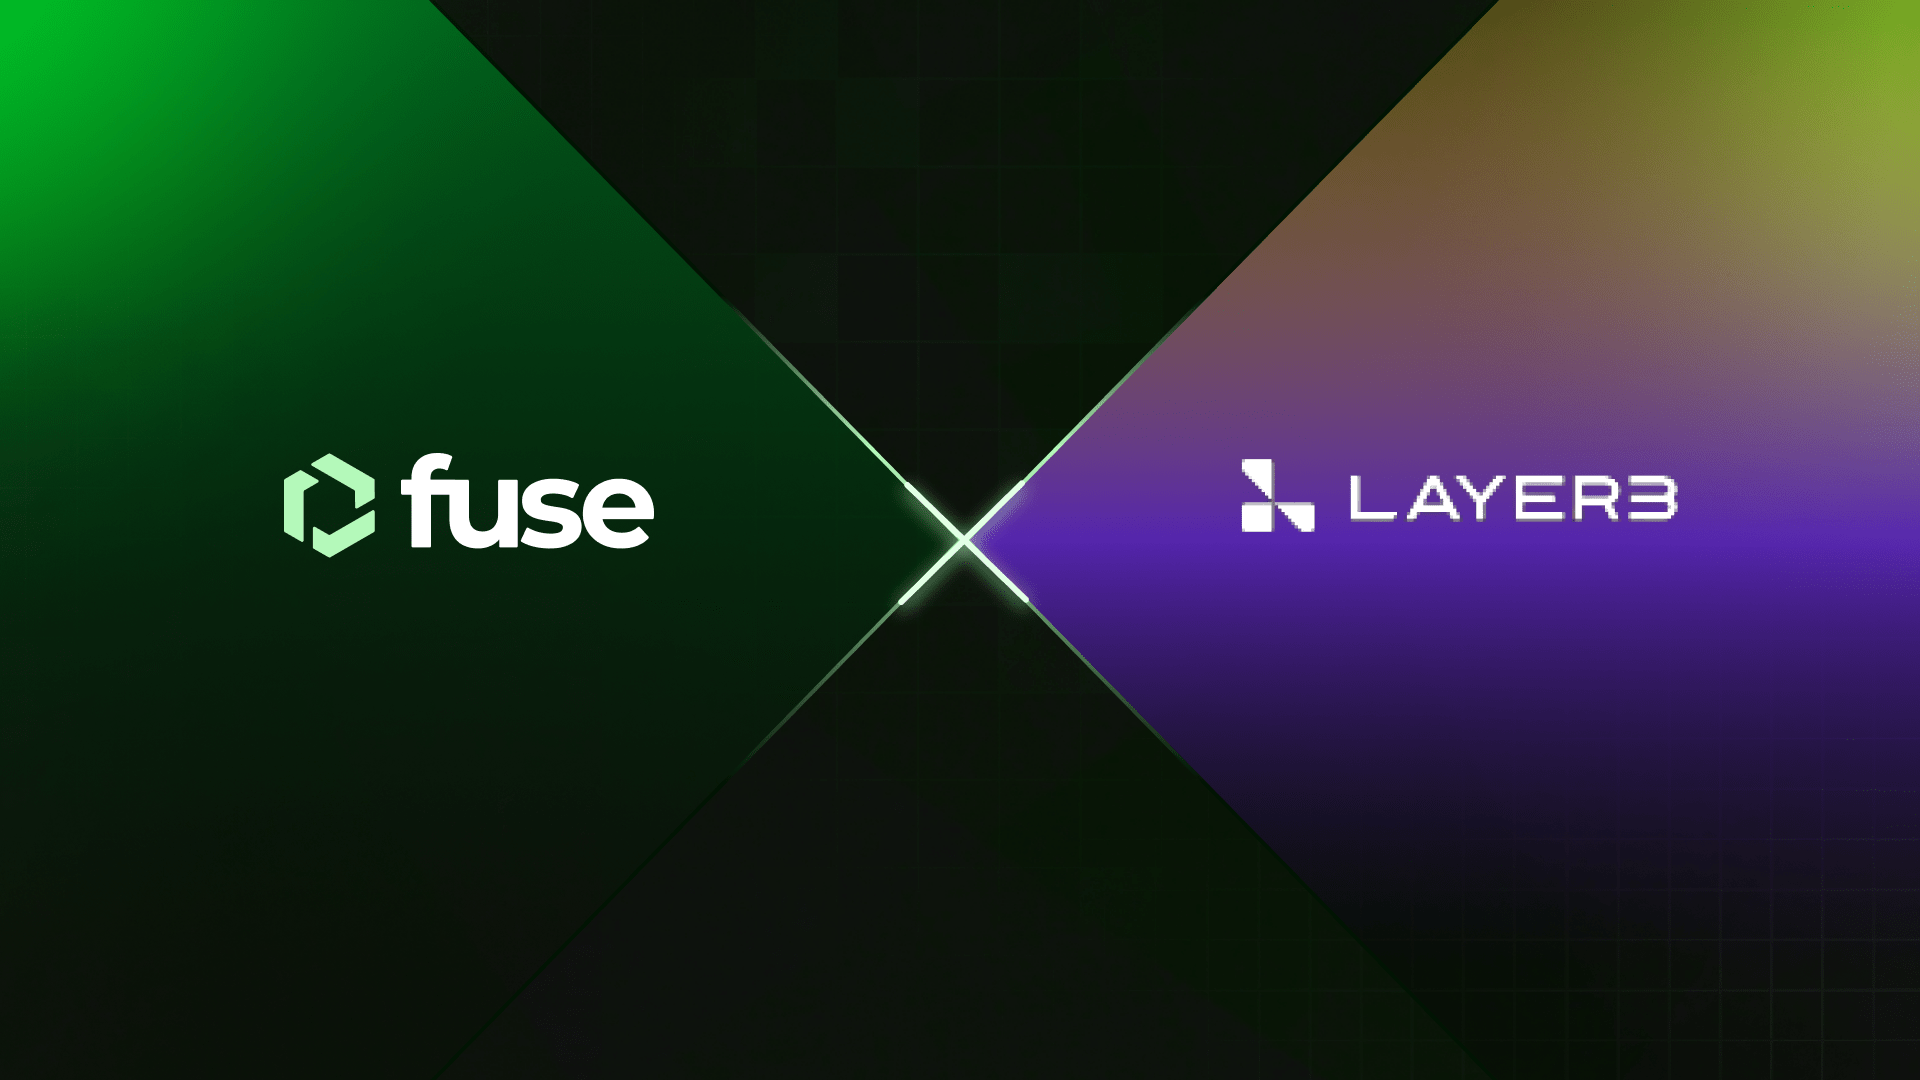 Fuse is excited to mark another important milestone in expanding our ecosystem with a new partnership with Layer3